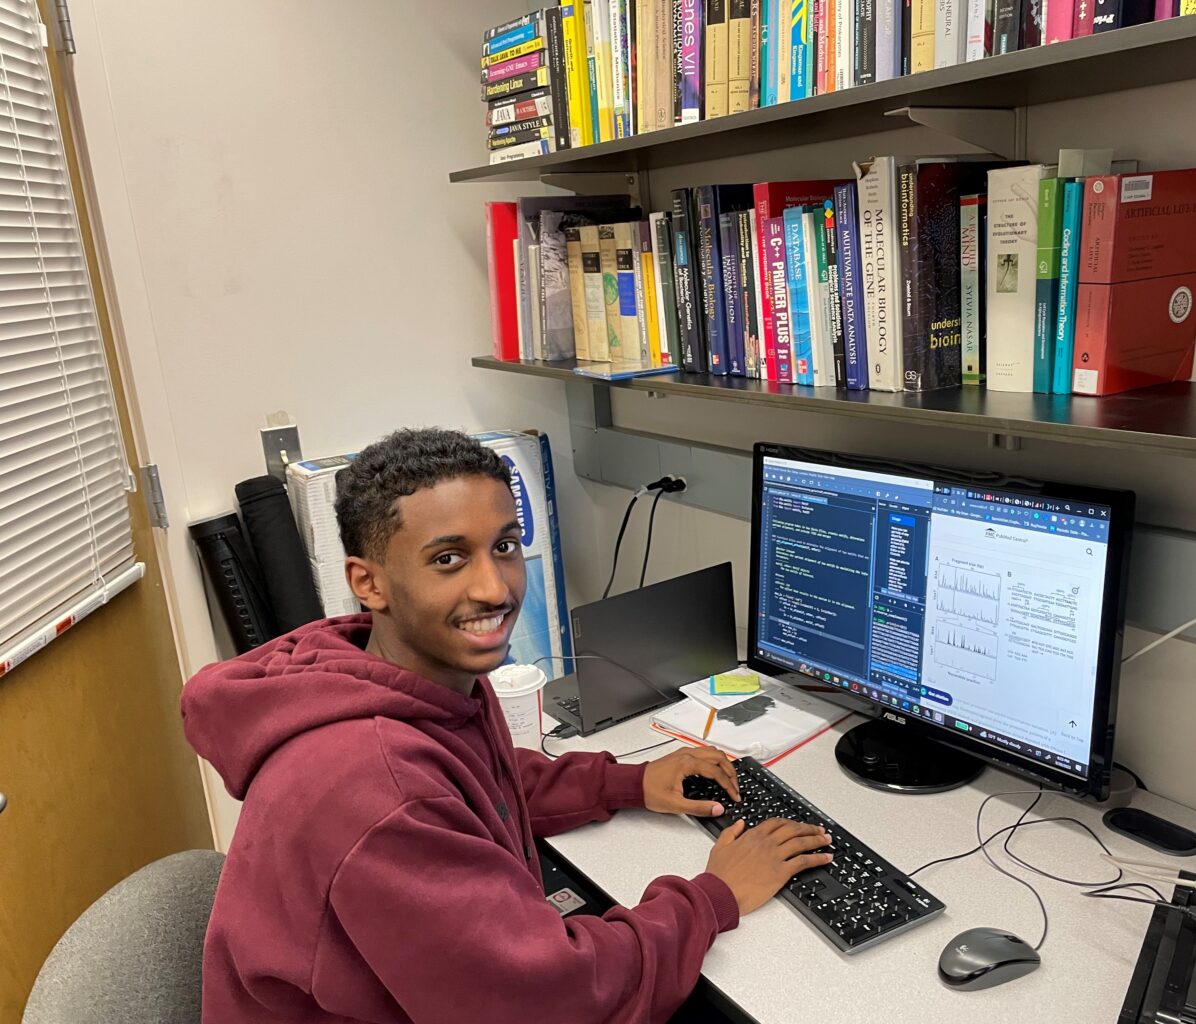 Student smiling while working on a desktop computer, with computer code and charts visible on the screen and two shelves of books in the background.